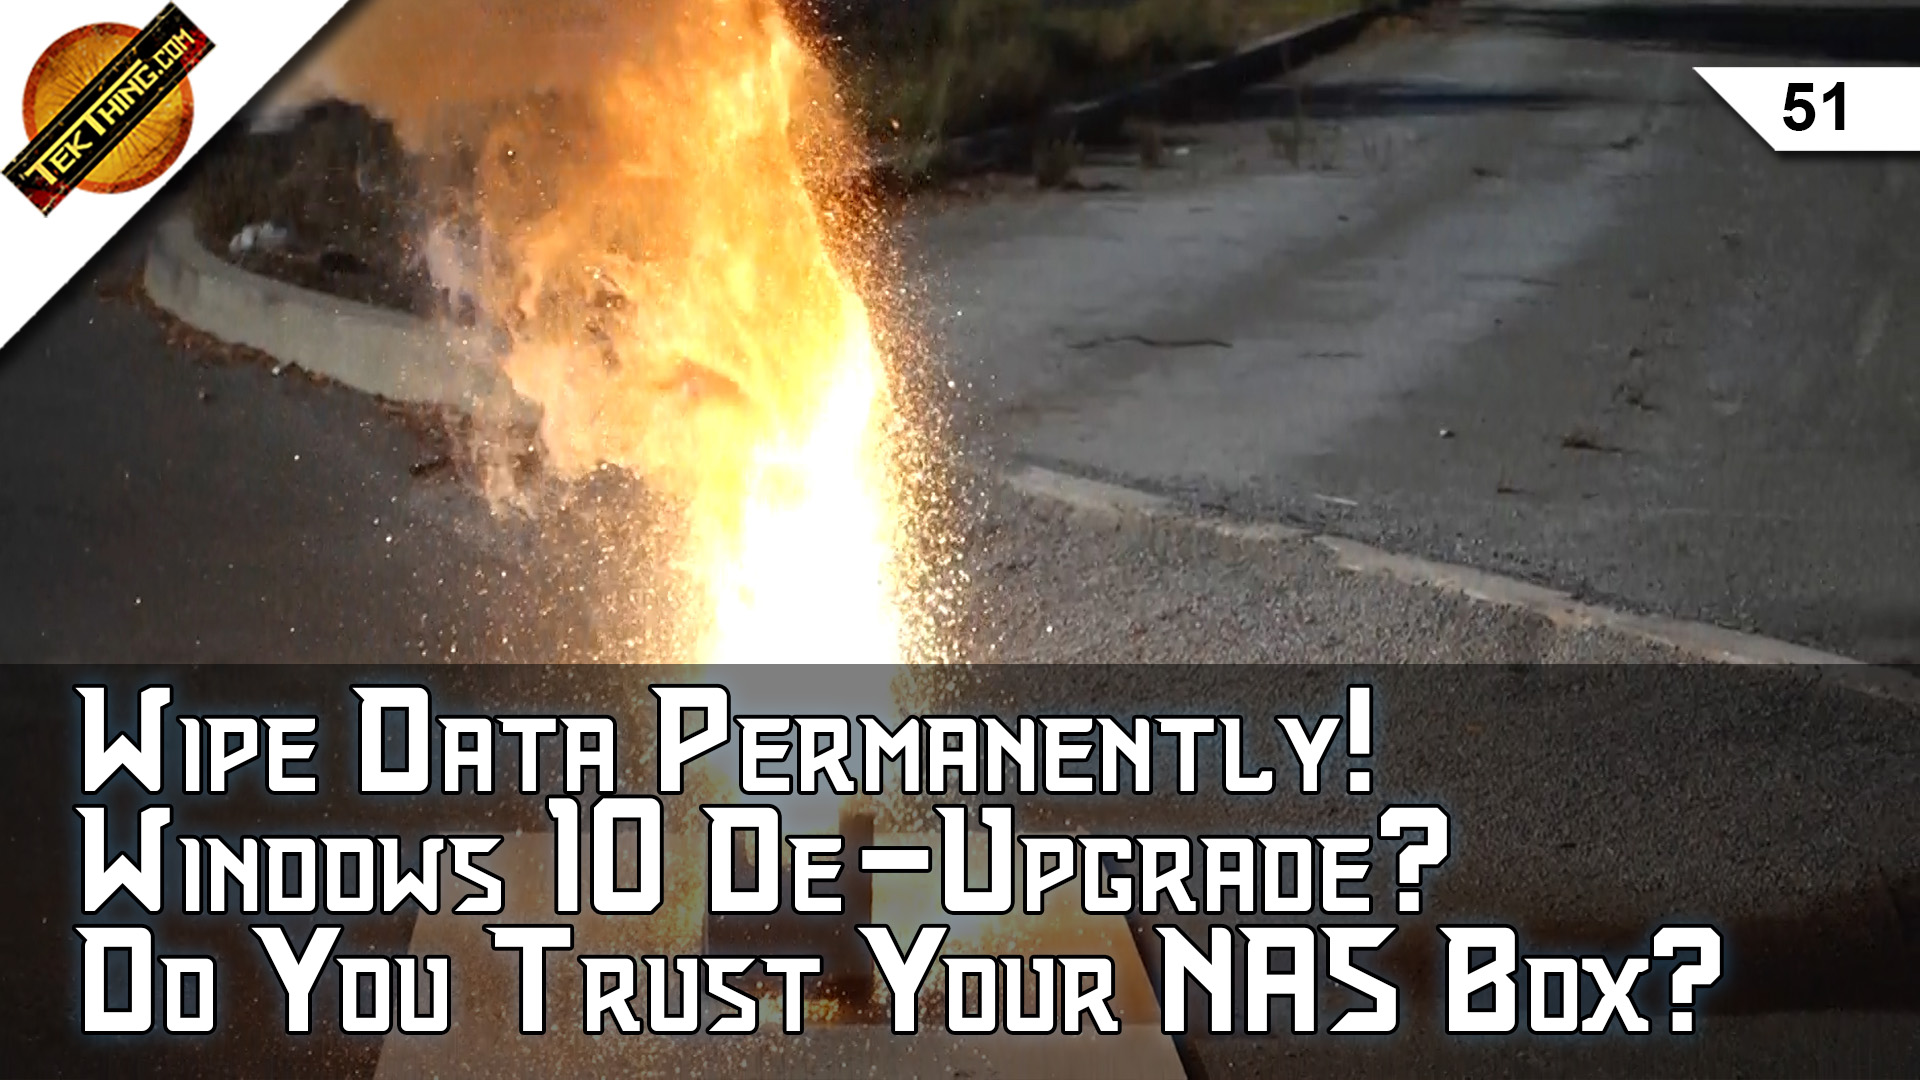 TekThing 51: Thermite, Acid, & Hammers Make Data Gone Forever! Do You Trust Your NAS? De-Upgrade Windows 10...